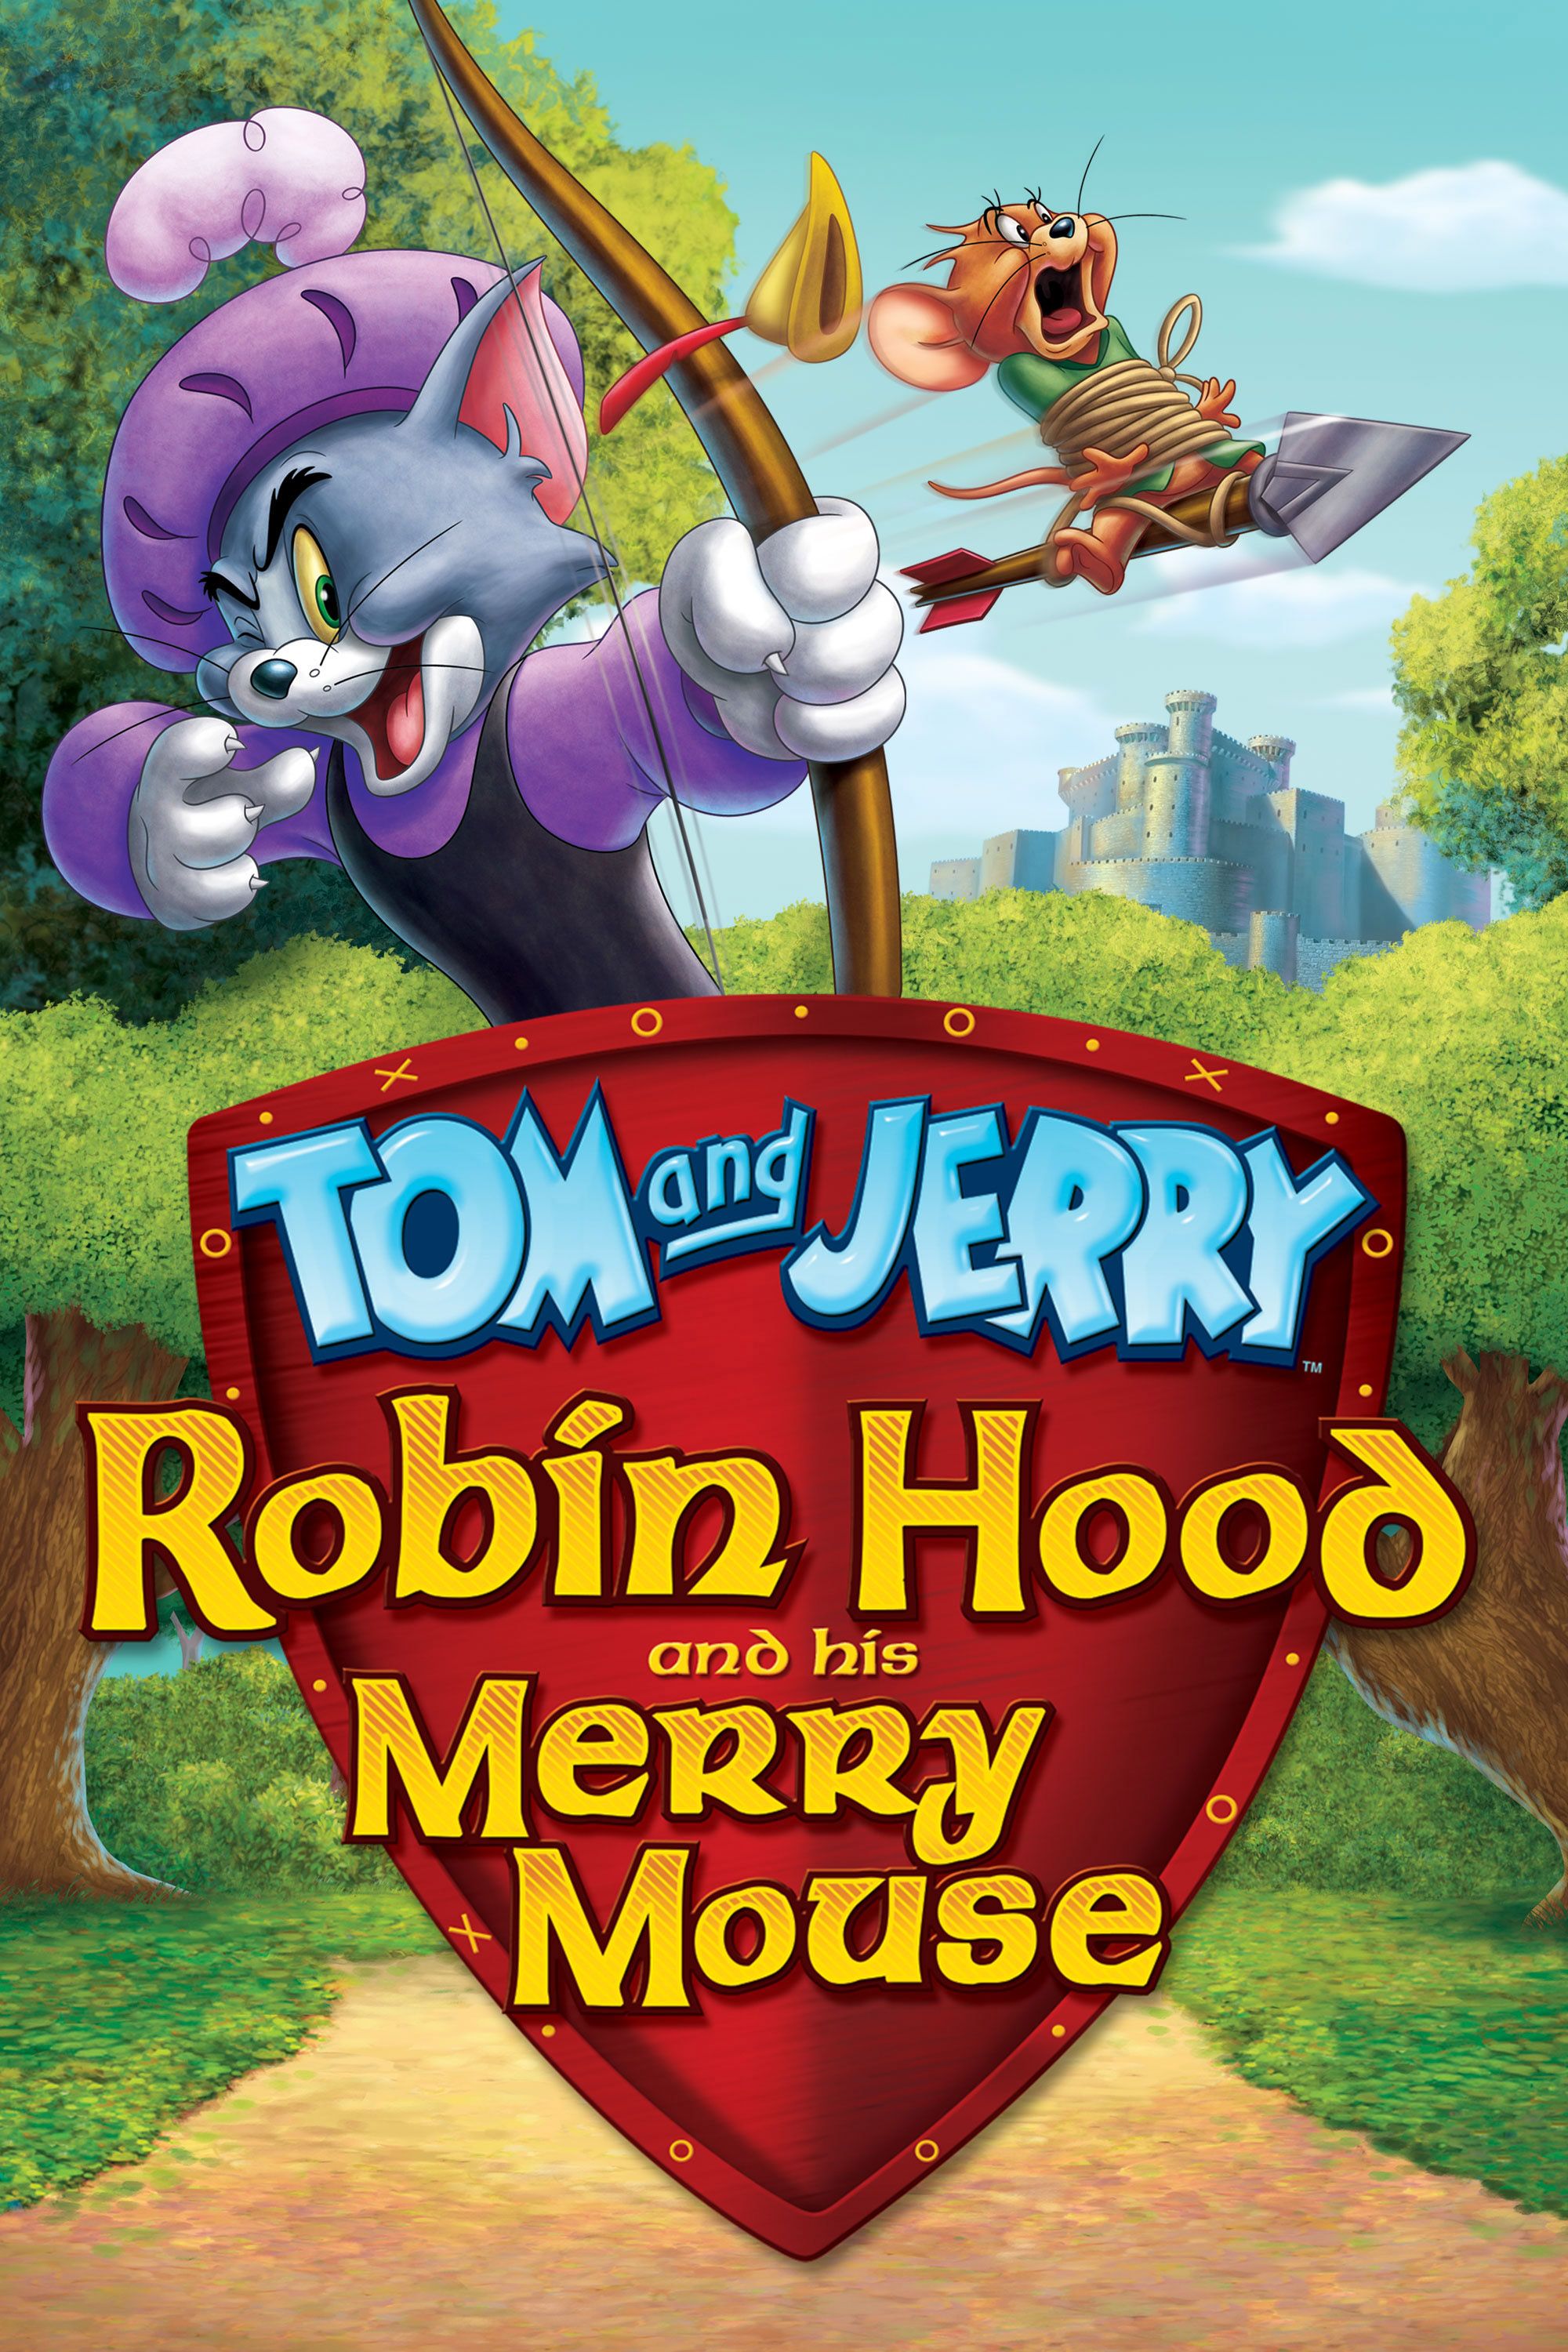 Tom and Jerry: Robin Hood & Merry Mouse | Movies Anywhere